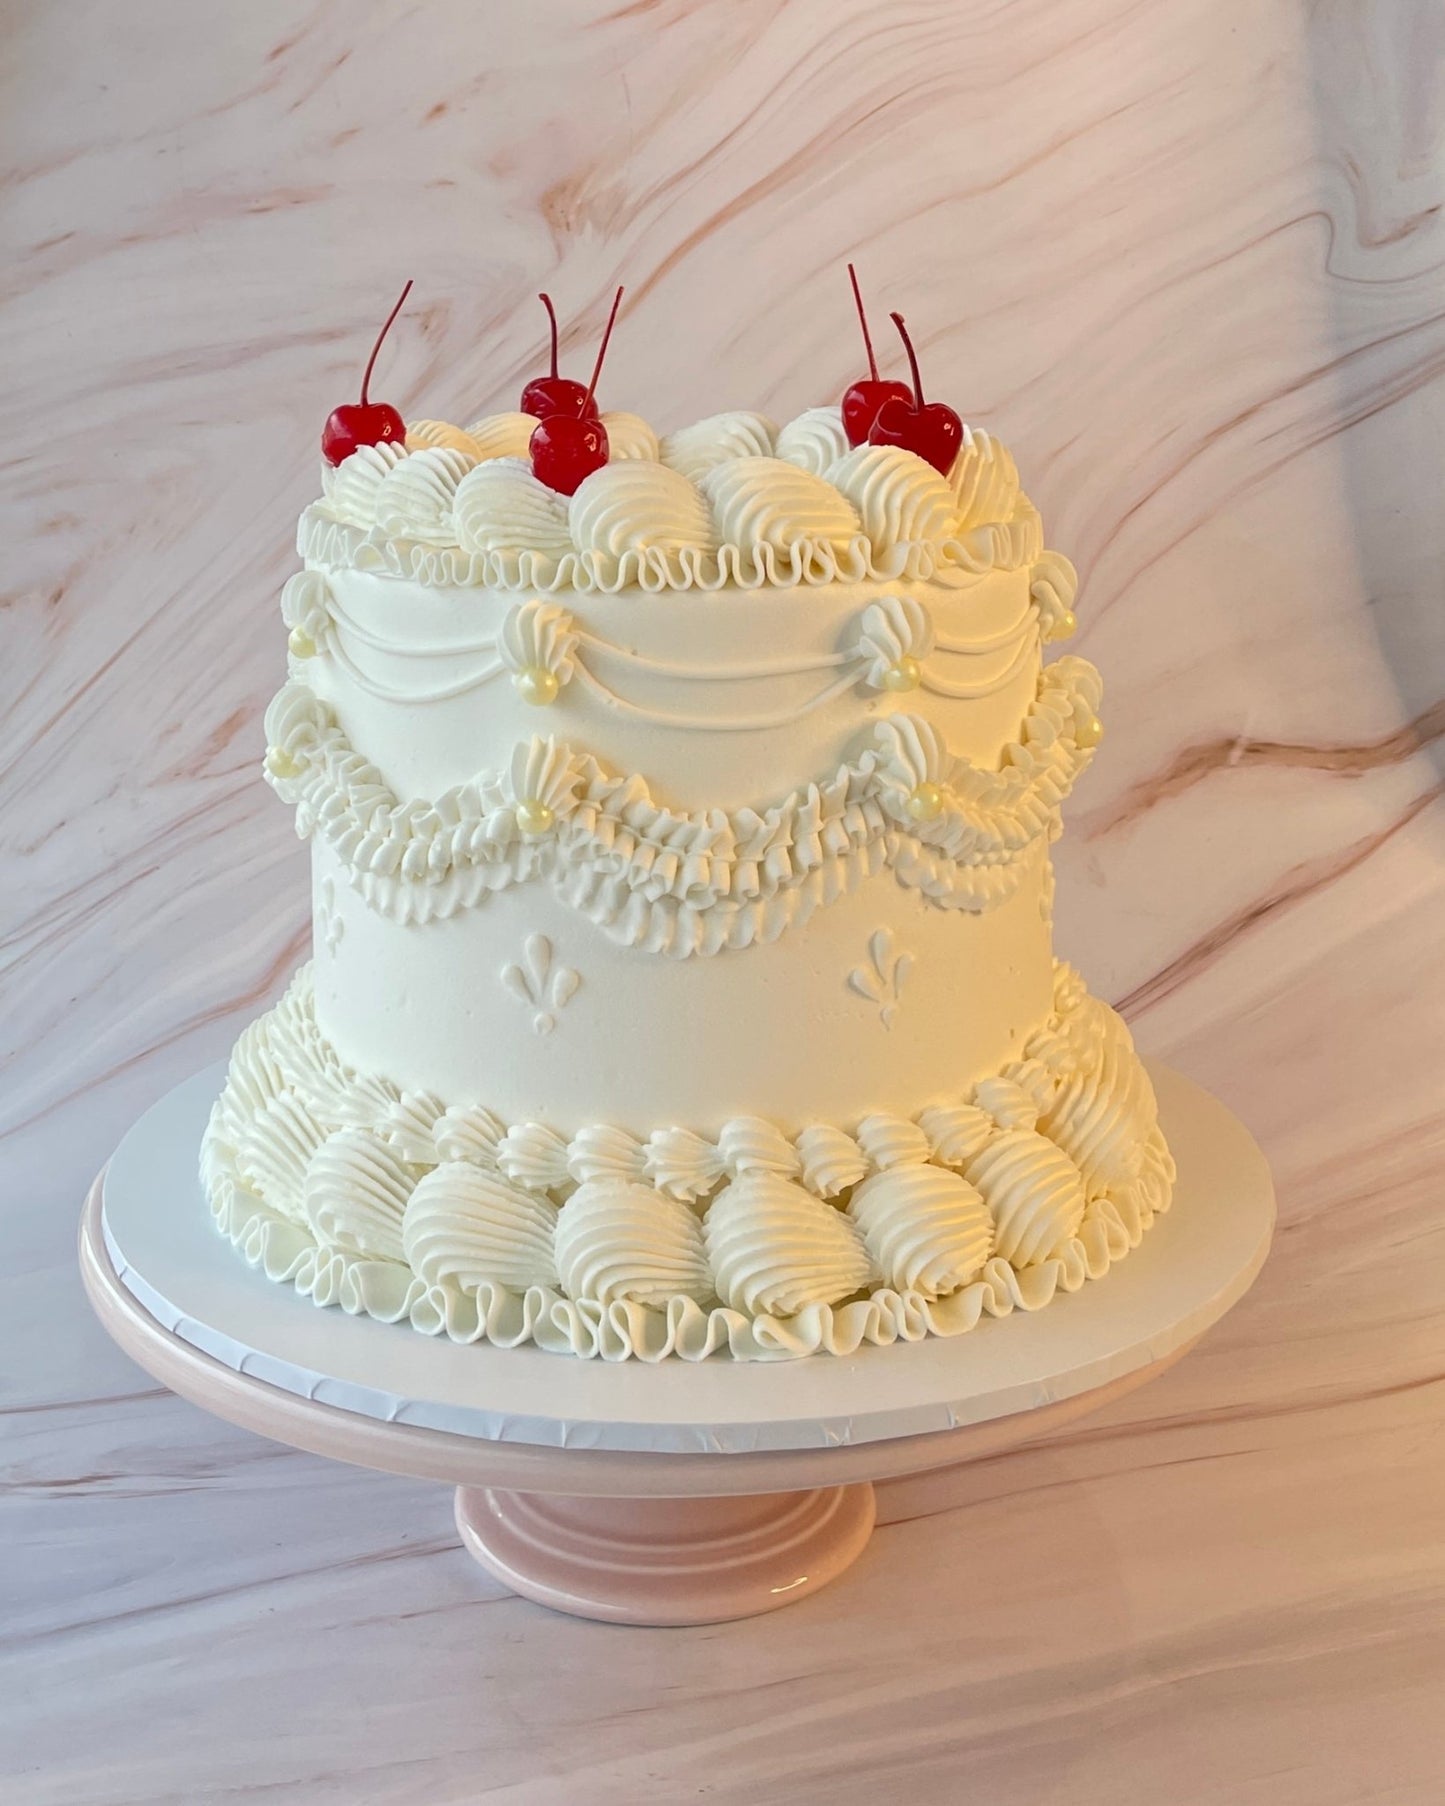 Load image into Gallery viewer, White with Red Cherries Vintage Cake - Flour Lane
